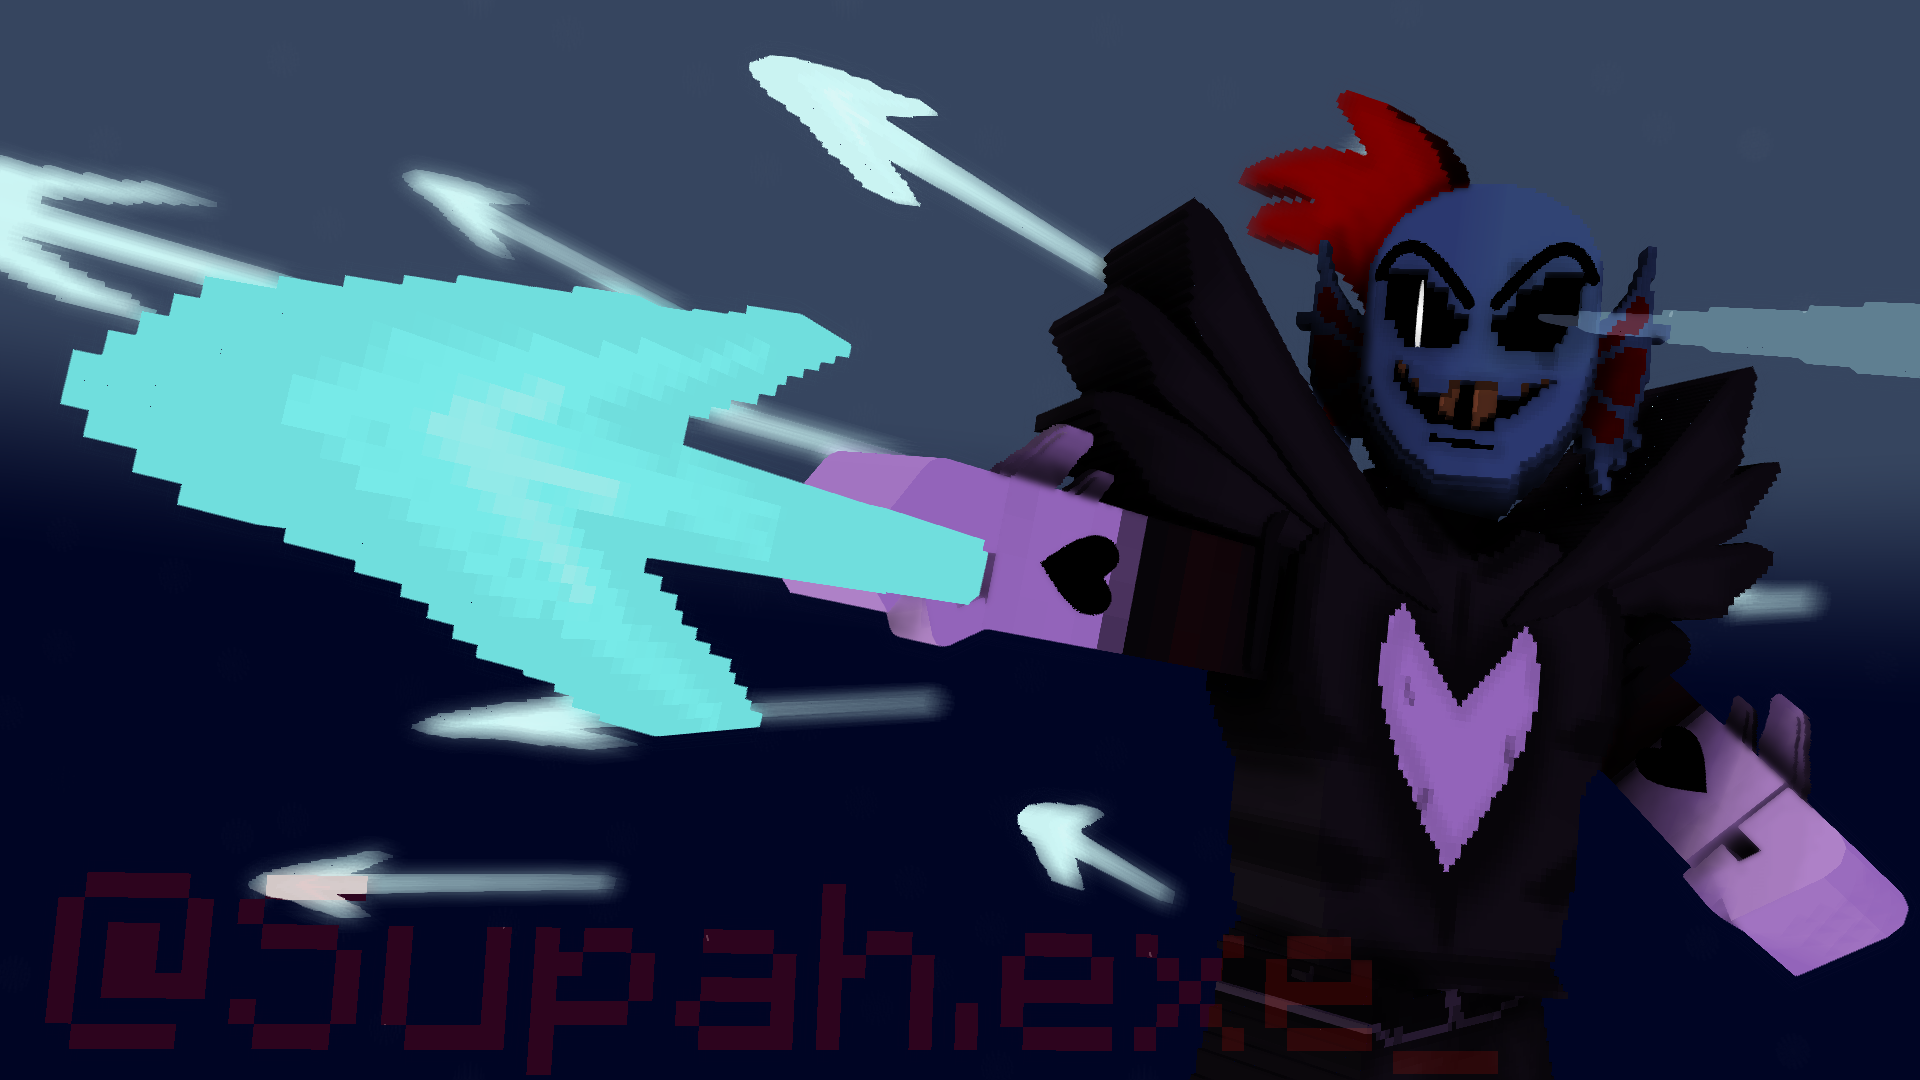 Undyne The Undying Undertale Wallpaper And Art Mine Imator